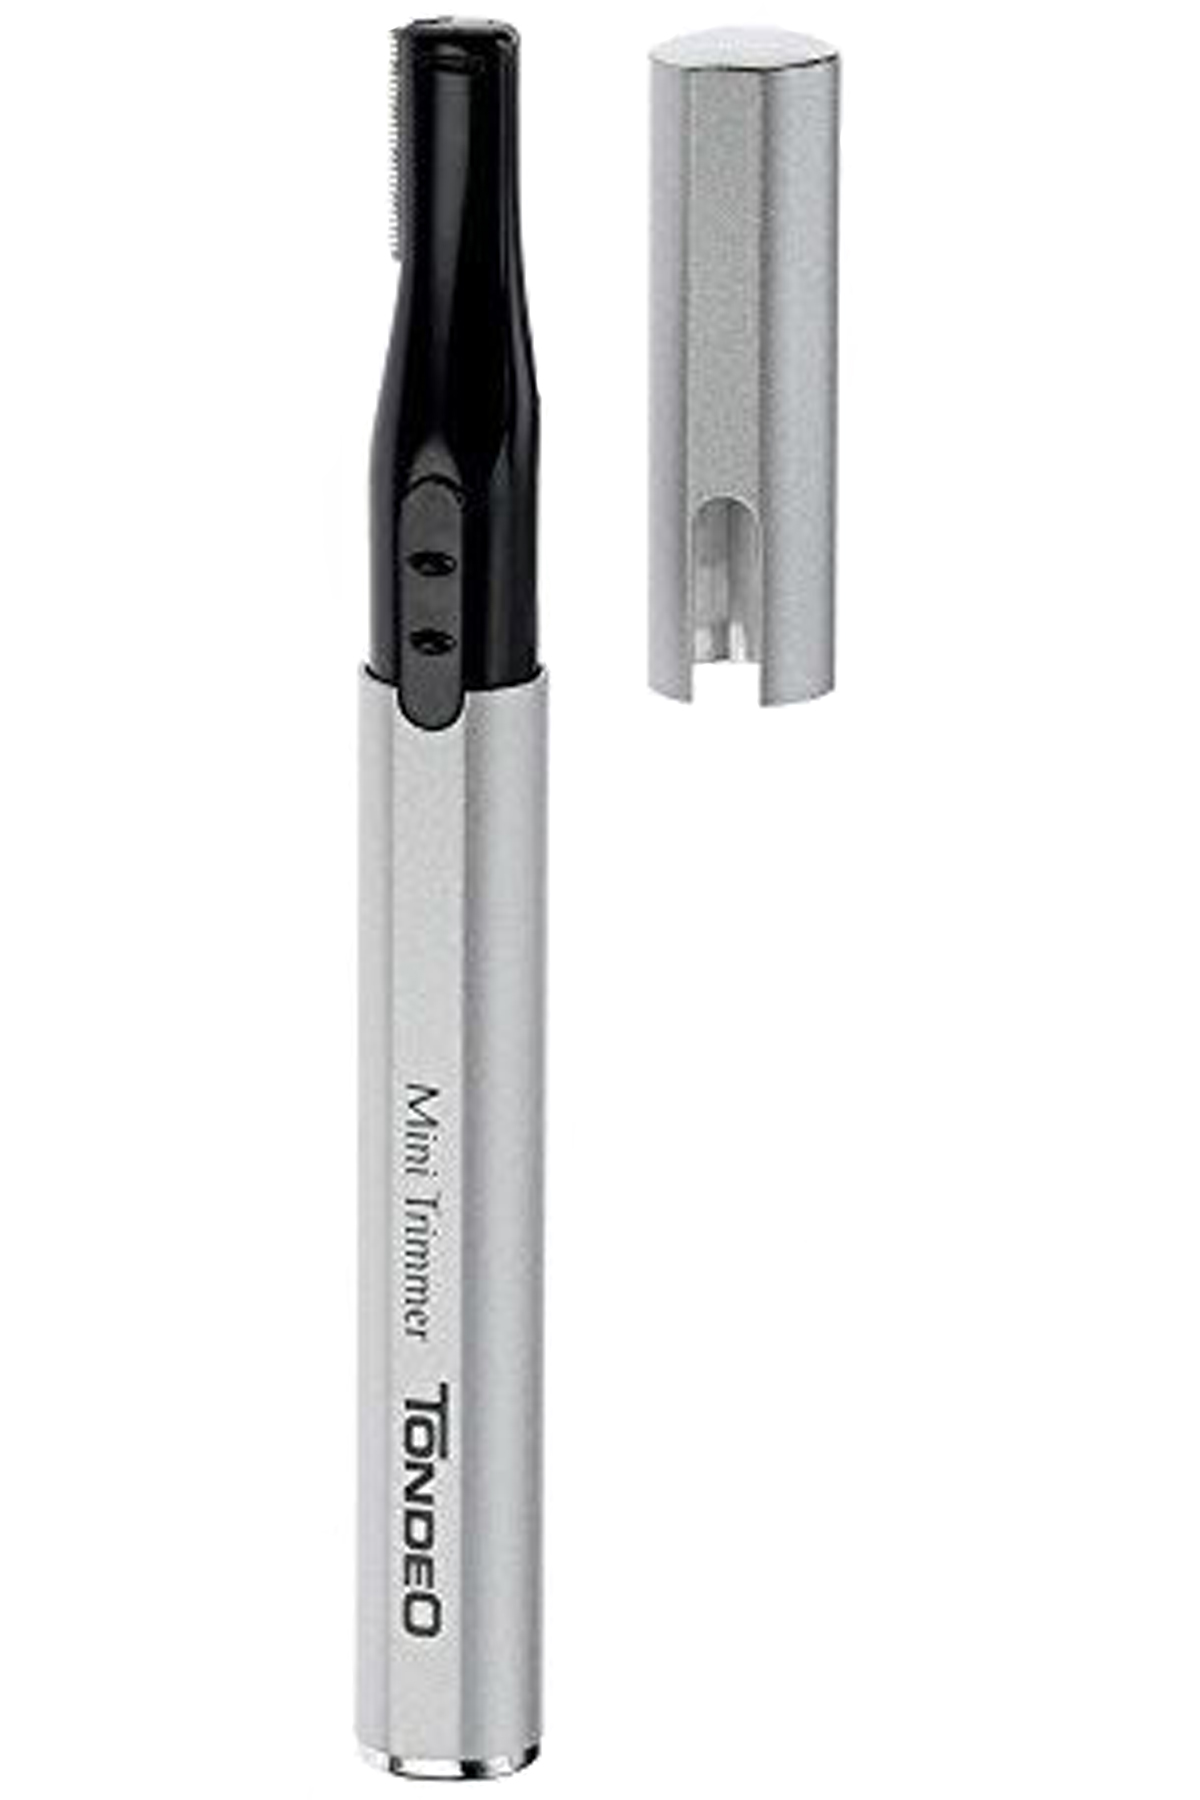 Tondeo Hairliner Mini Trimmer